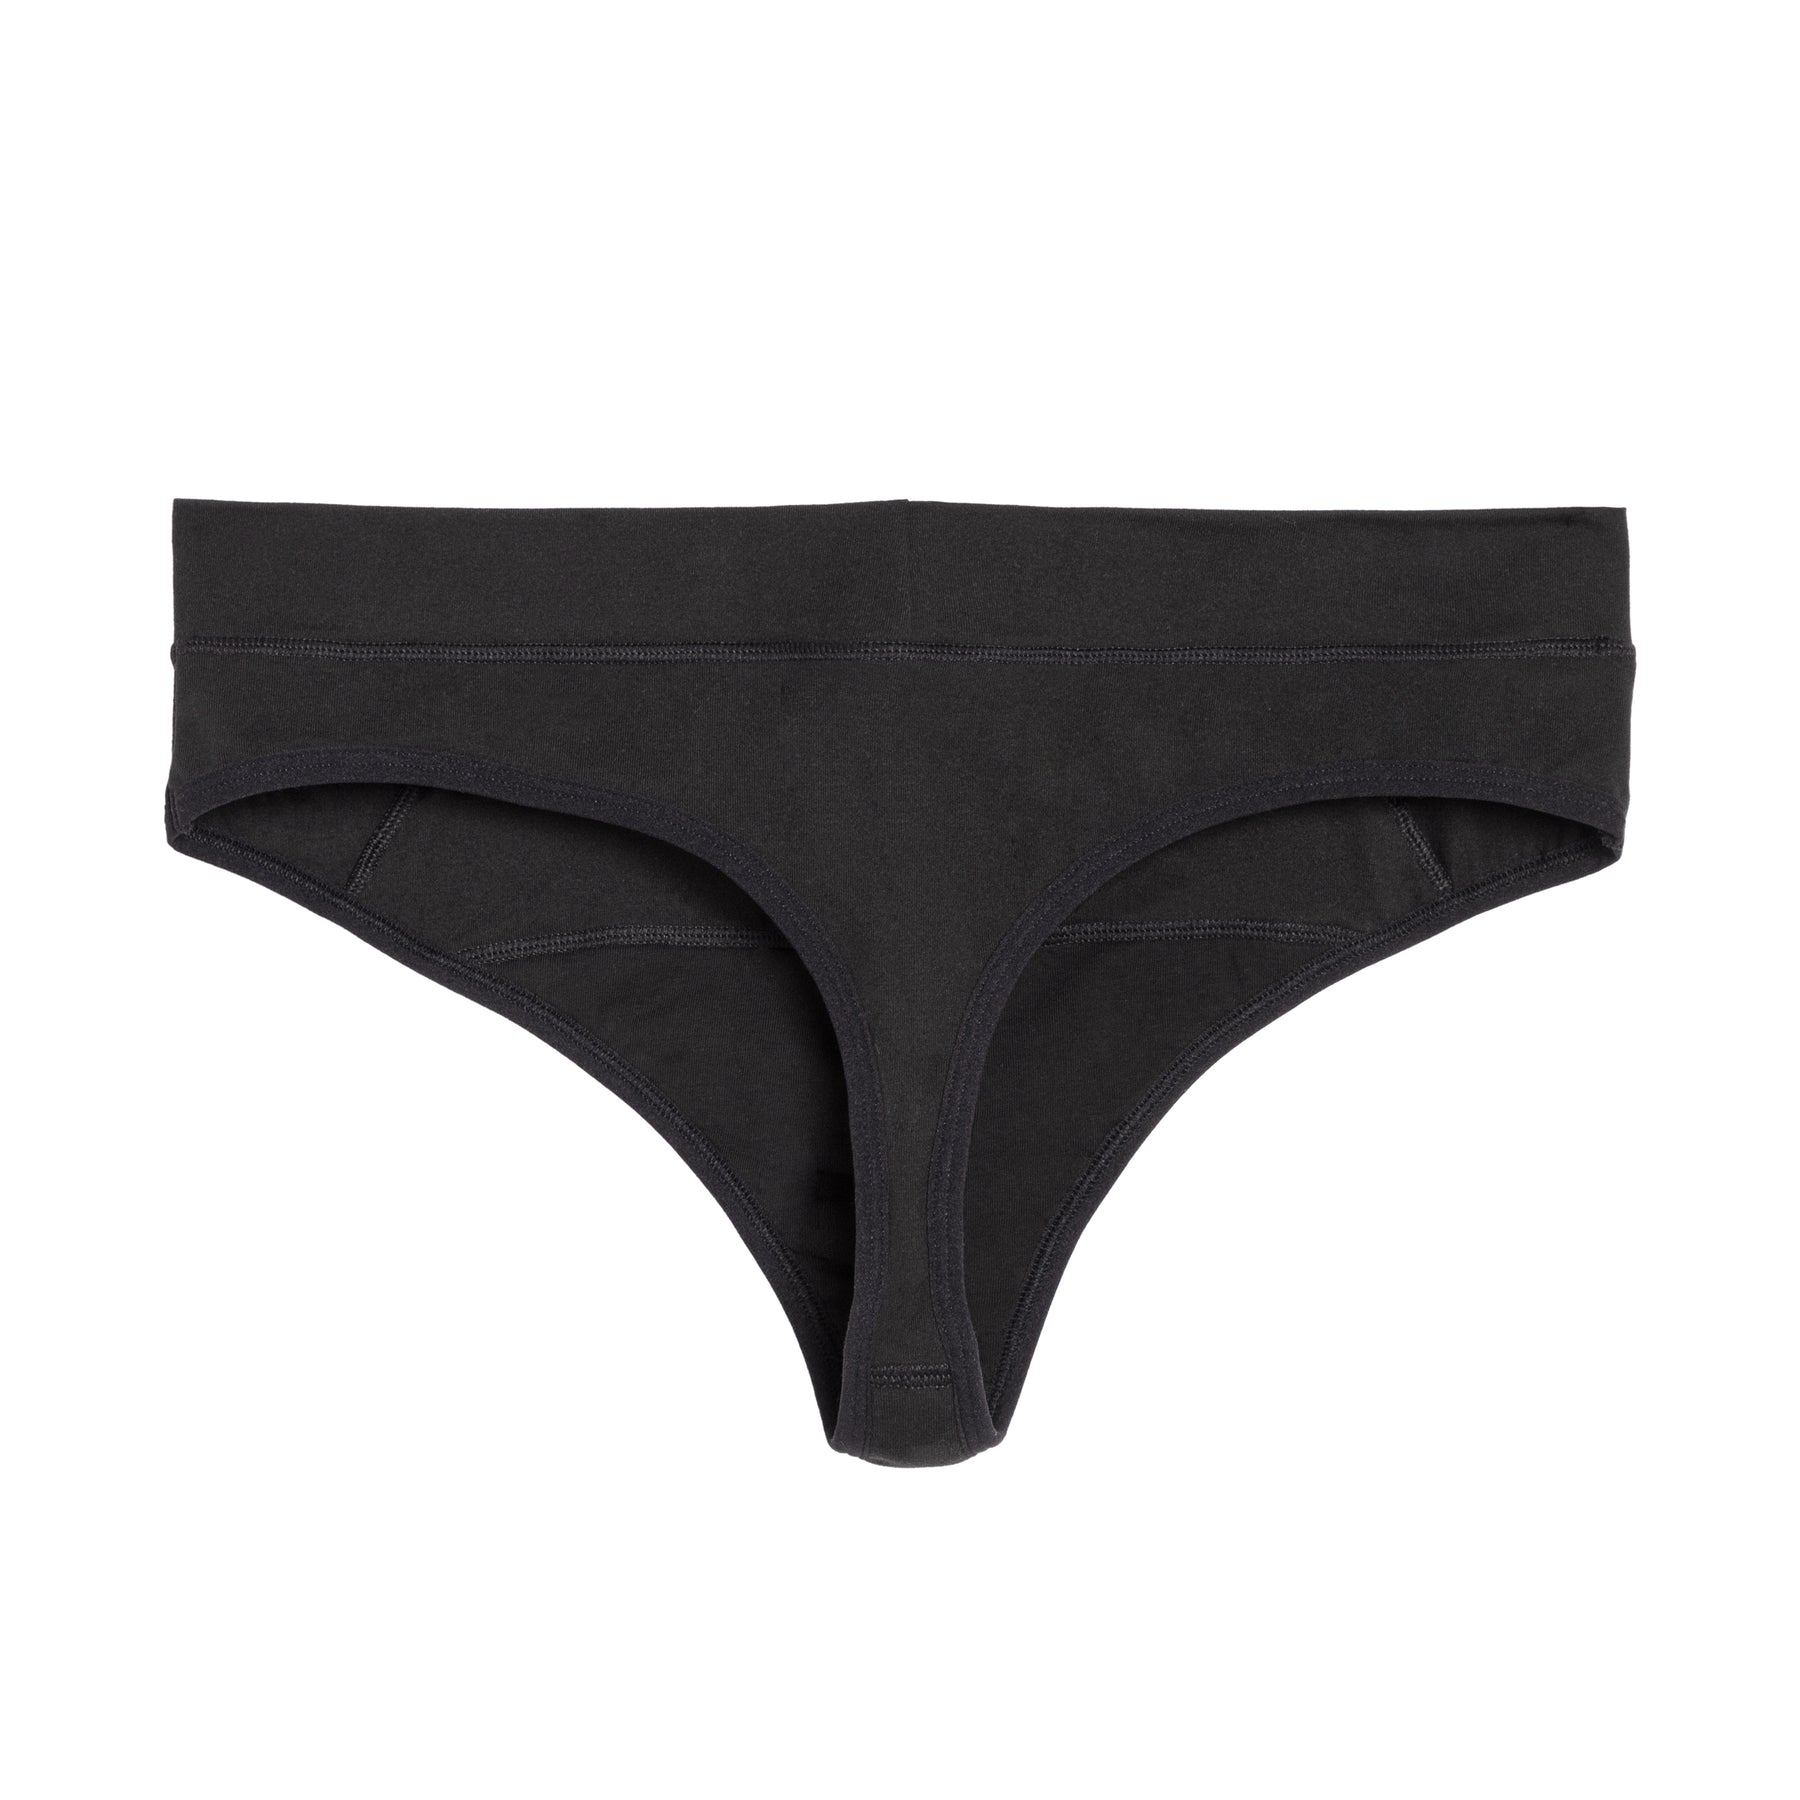 The Thong Period. in Microfiber For Light Flows. – The Period Company